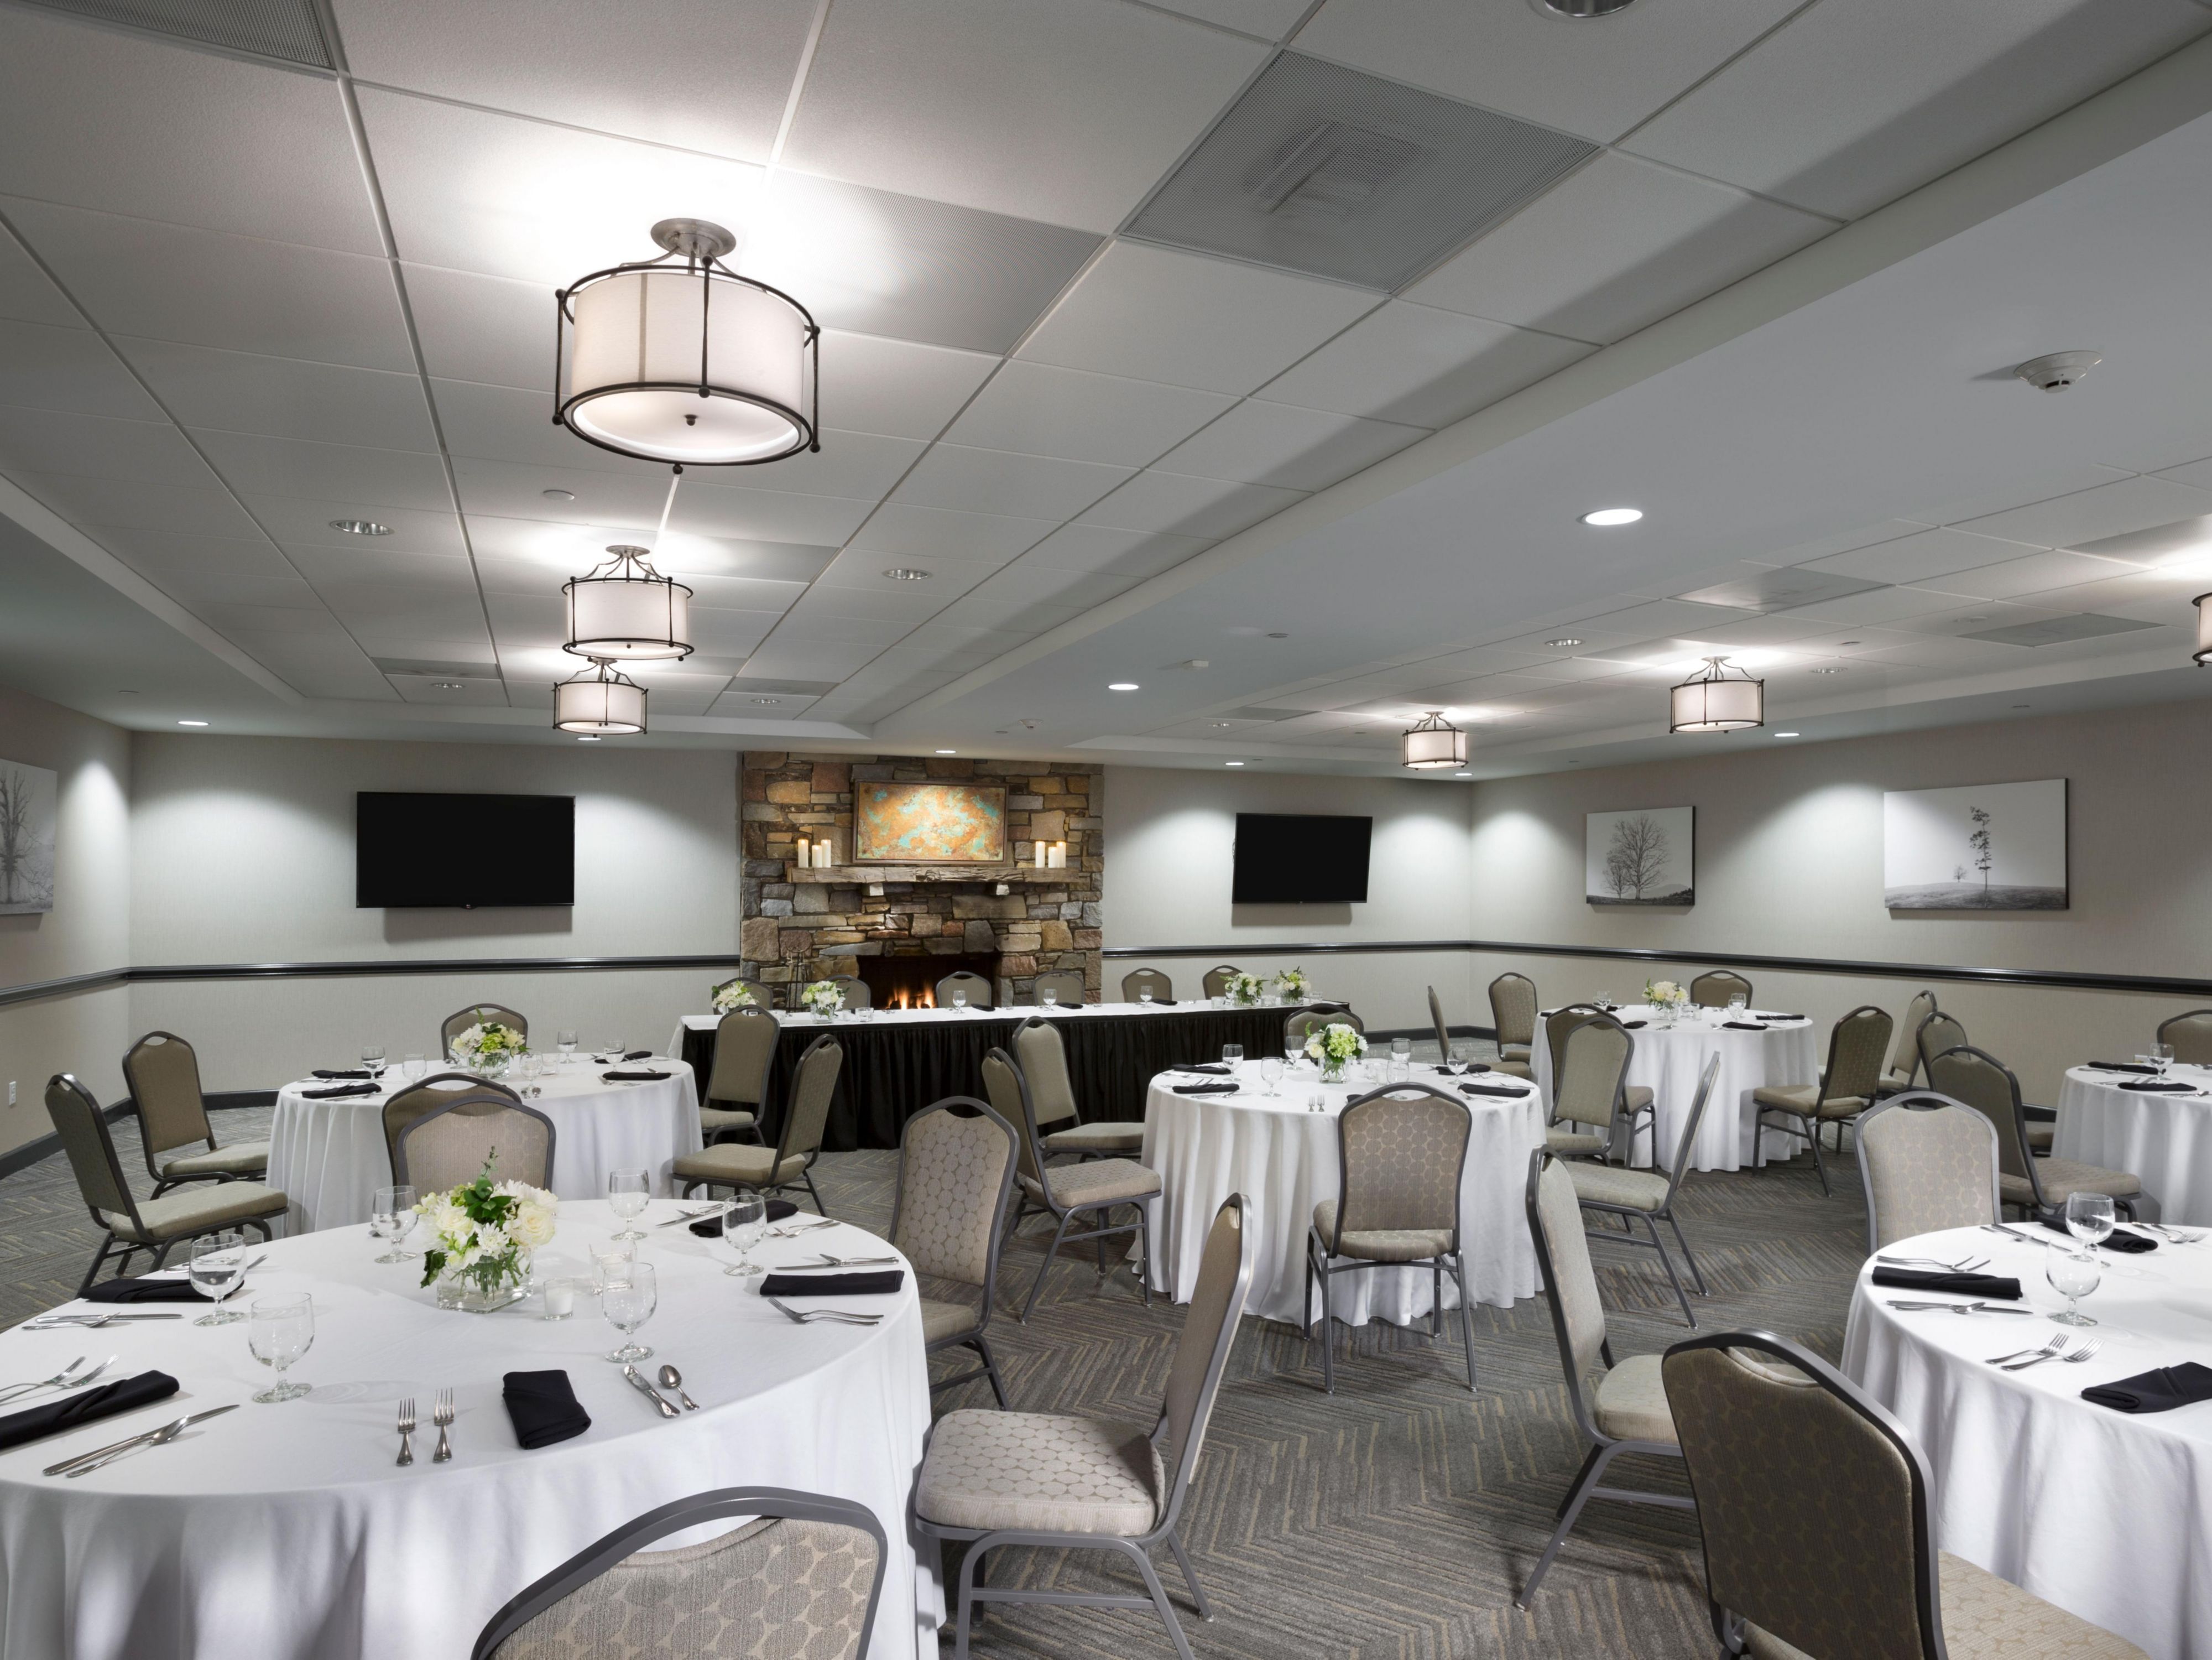 Host your next event with us in the Blue Ridge Room, featuring a working stone fireplace, 2 60" Smart TV's and all your AV needs. Whether you're hosting an intimate business meeting or extravagant celebration we have the space you need.  Contact Emily or Casey in our Sales Department to get started! 828.298.5611 or sales@holidayinneast.com.
